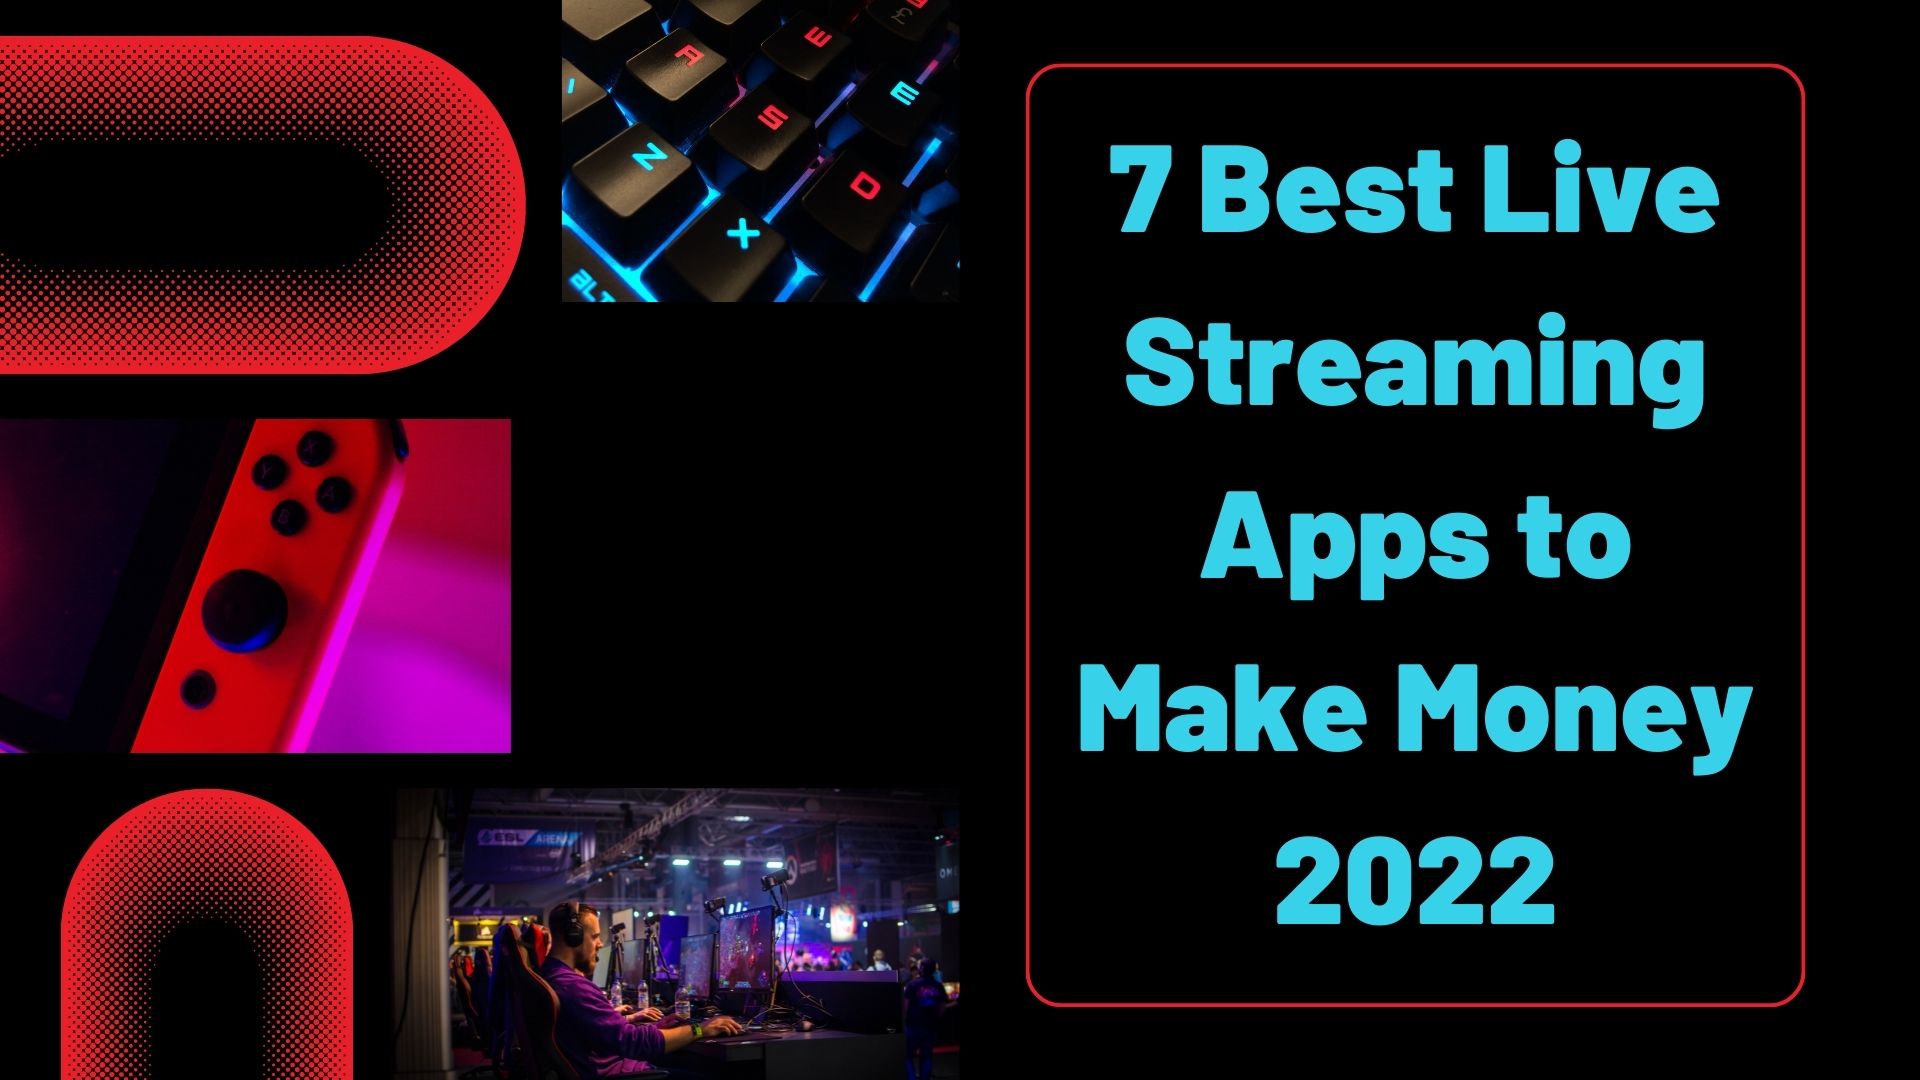 7 Best Live Streaming Apps to Make Money 2022